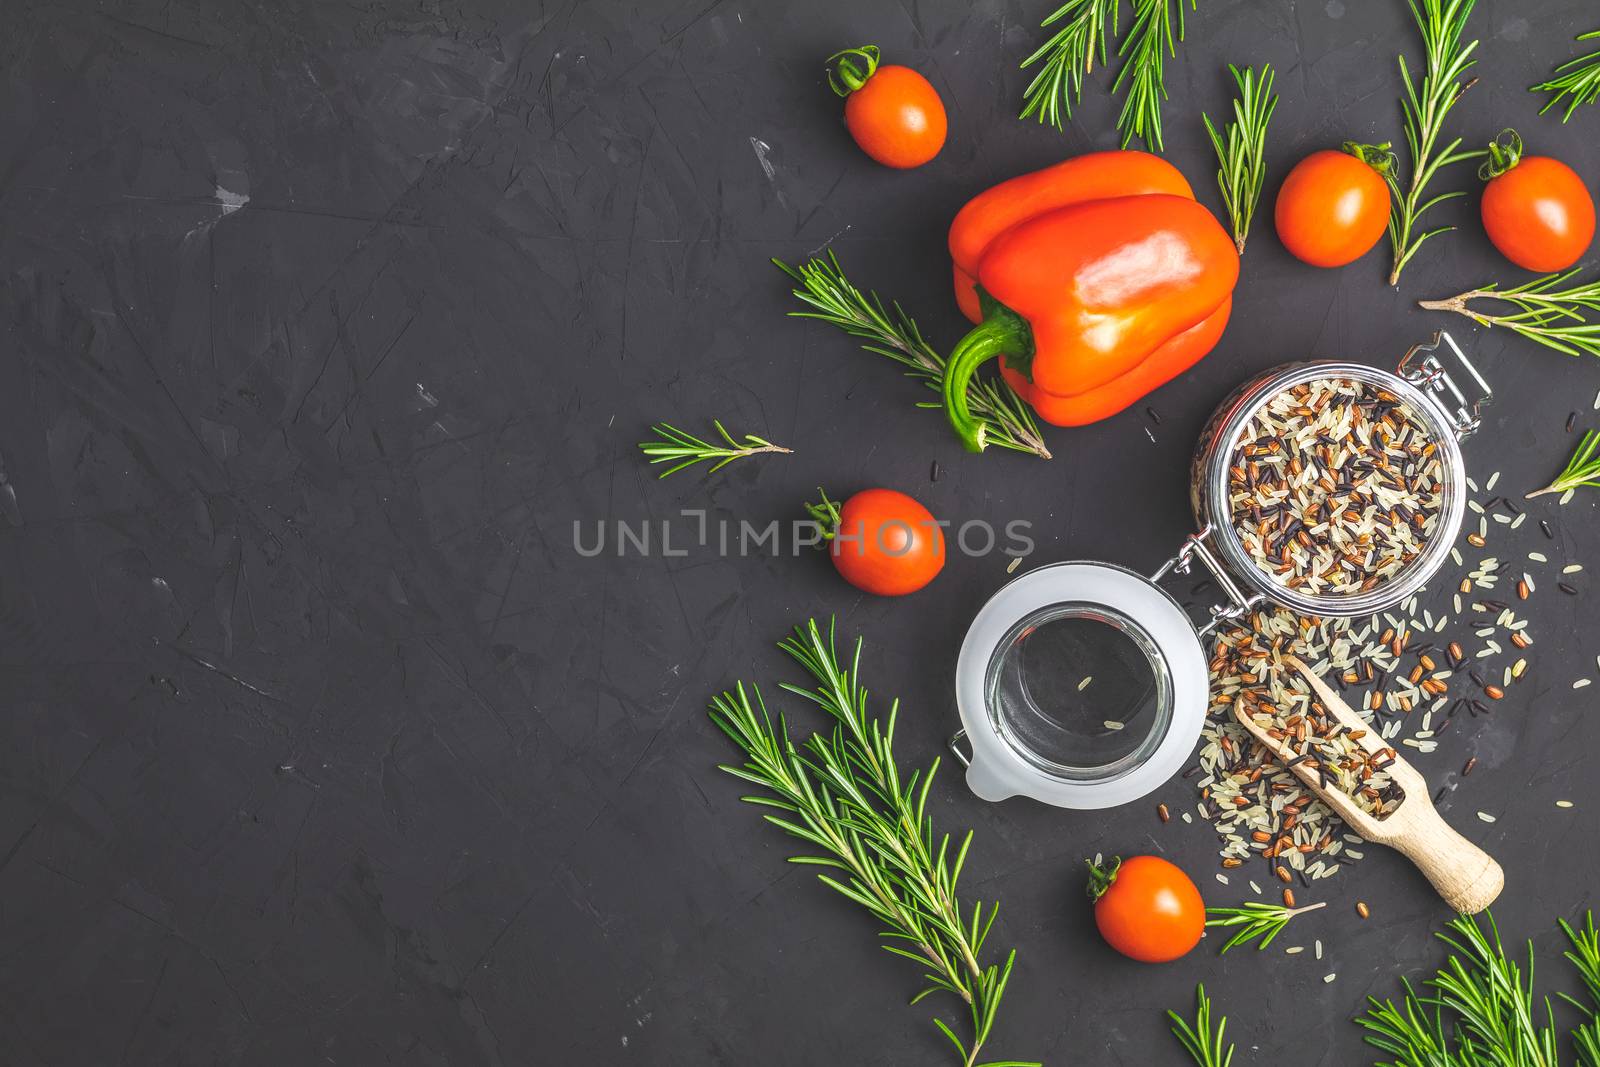 Black, purple, and white rice (Oryza sativa) mix in glass jar on black stone concrete textured surface background. Raw pepper, tomatoes, olive oil and rosemary bunch. Top view with copy space for your text.